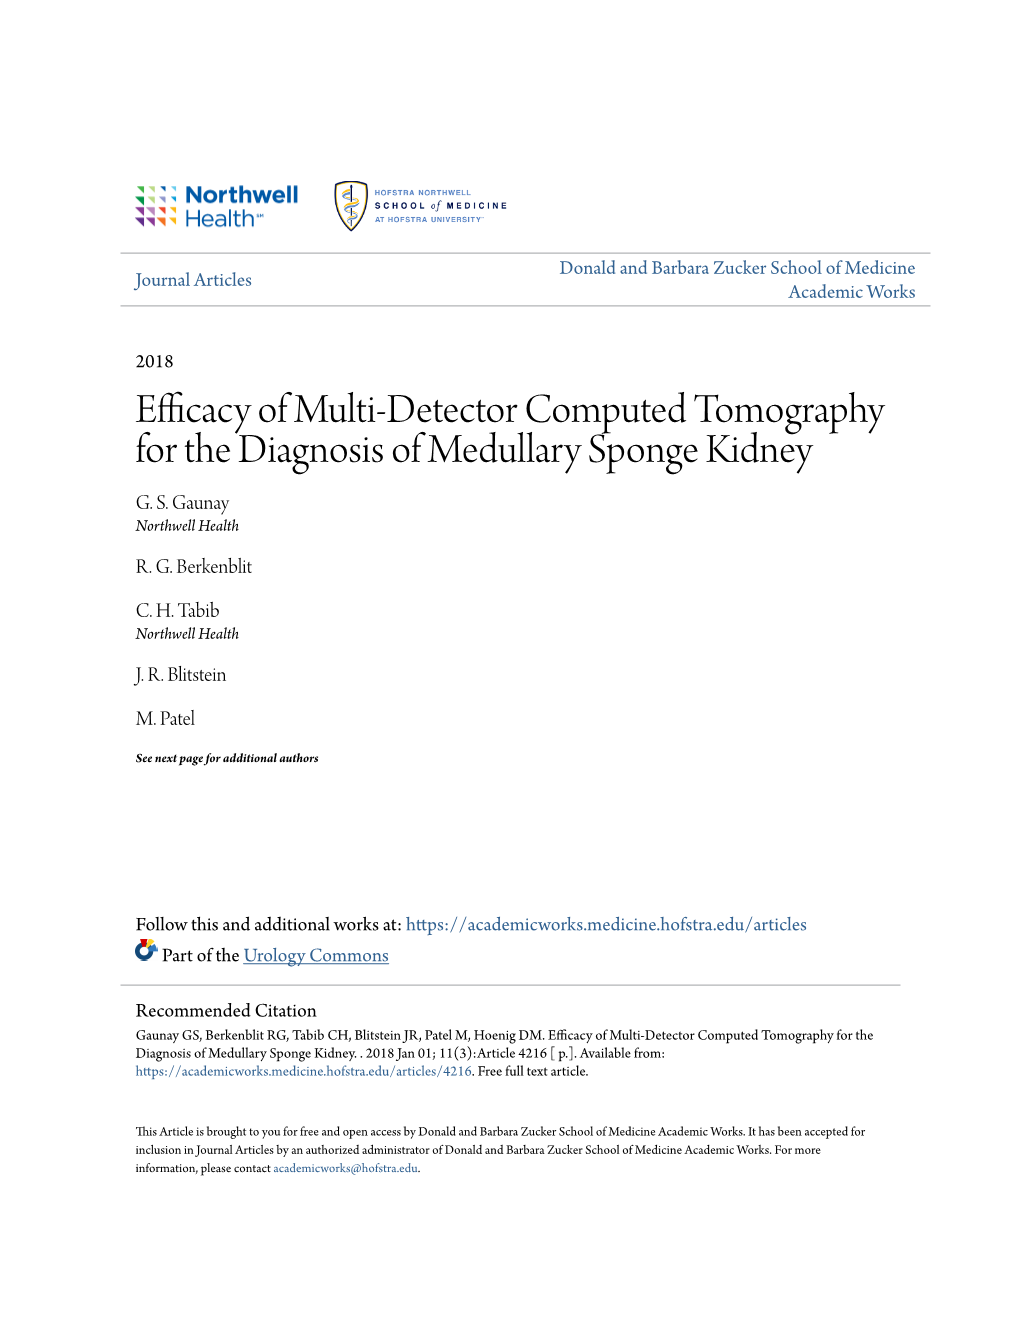 Efficacy of Multi-Detector Computed Tomography for the Diagnosis of Medullary Sponge Kidney G